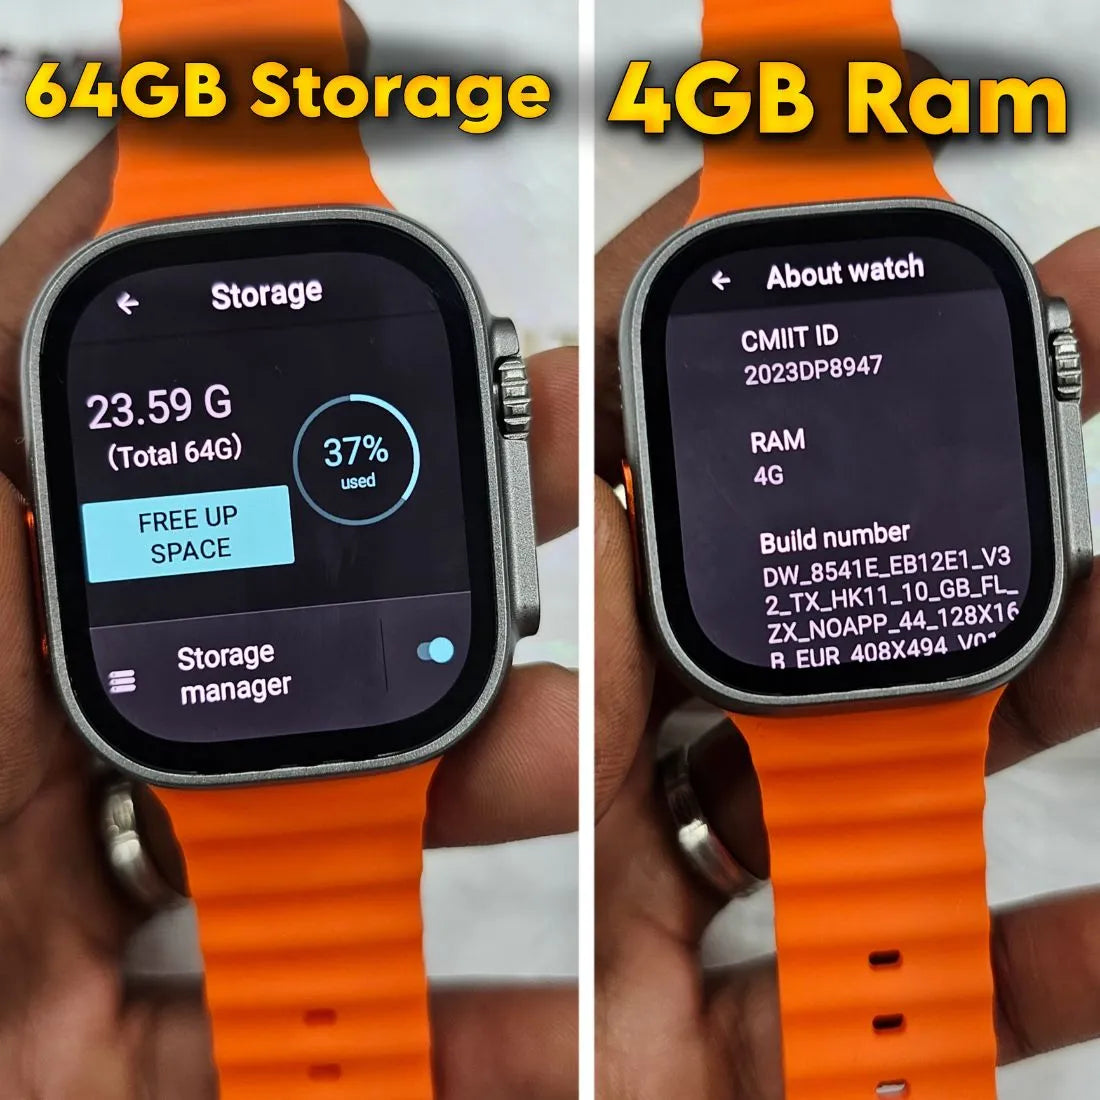 HK 11 Ultra One Android Smartwatch